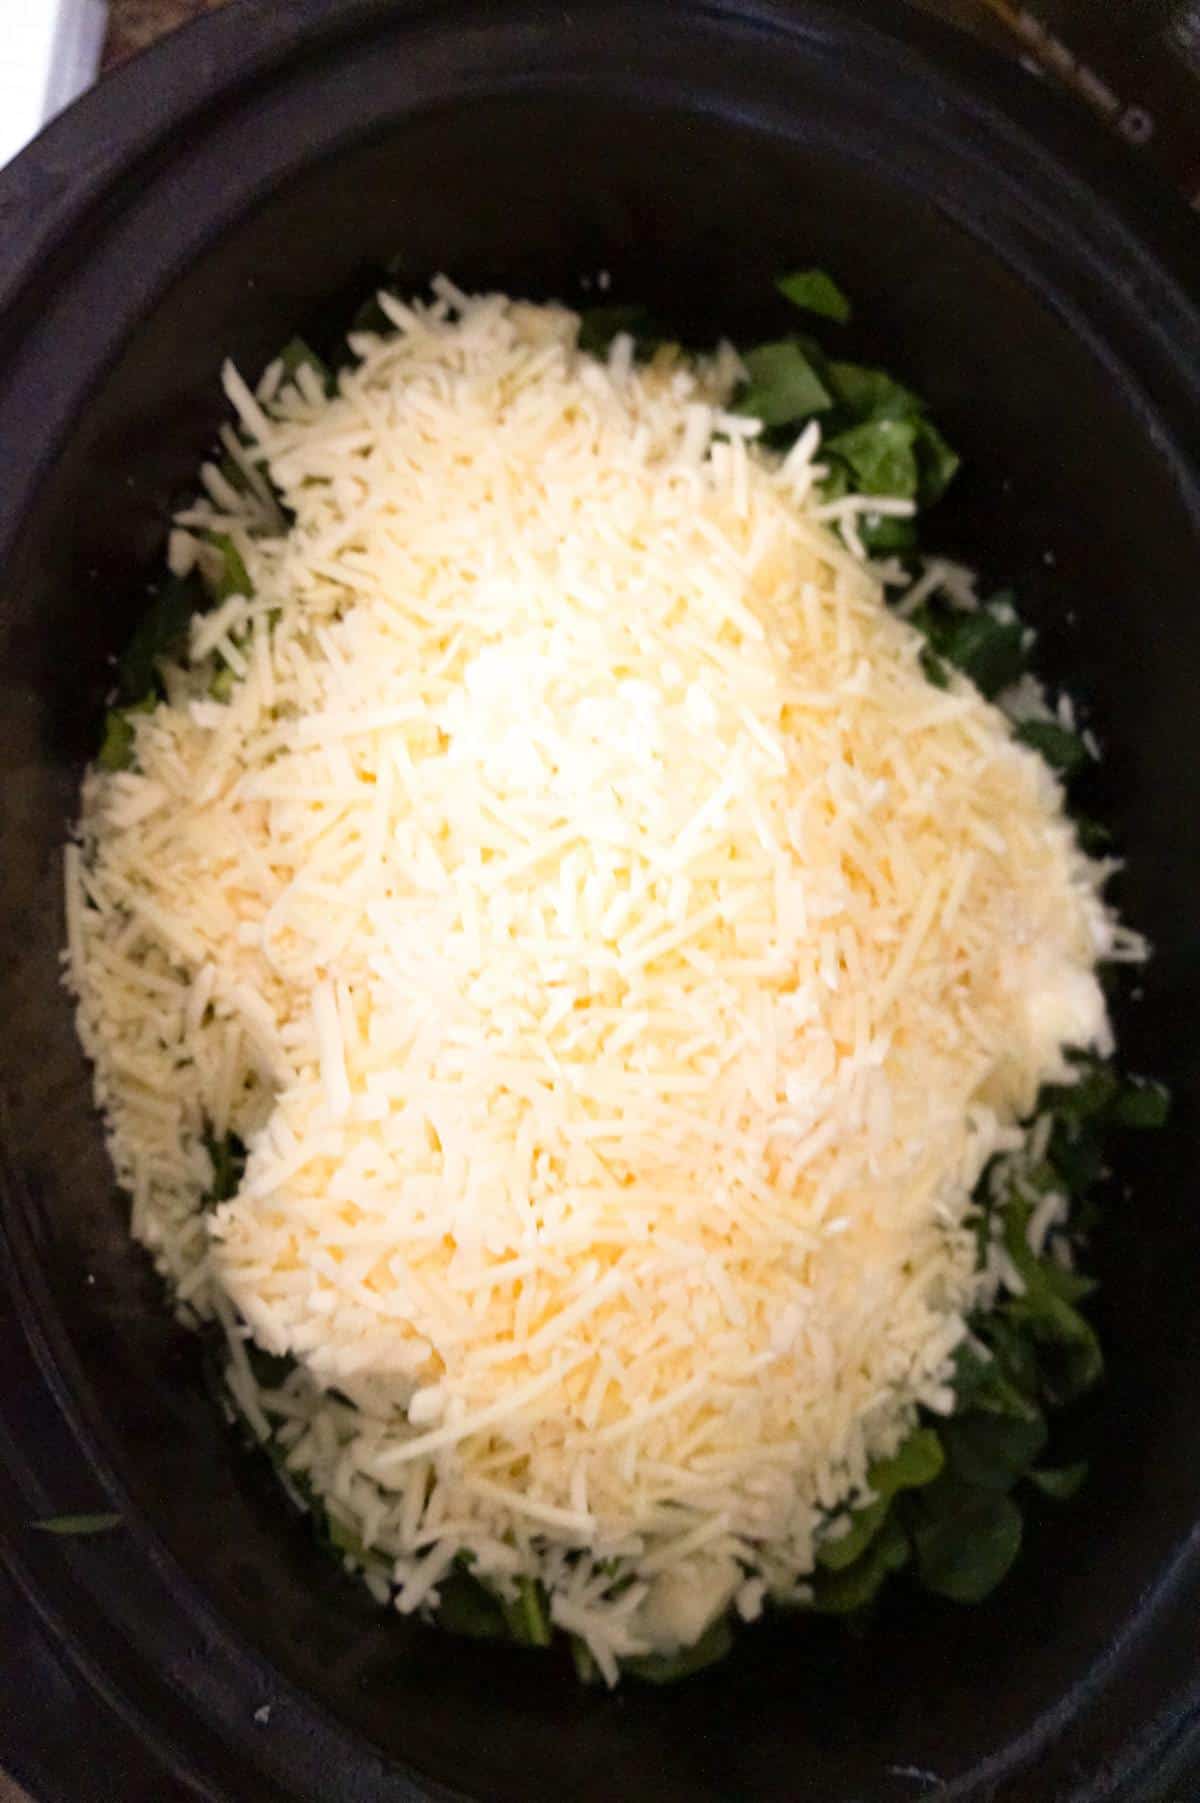 shredded mozzarella cheese and shredded Parmesan cheese on top of spinach, cream cheese and sour cream in a slow cooker